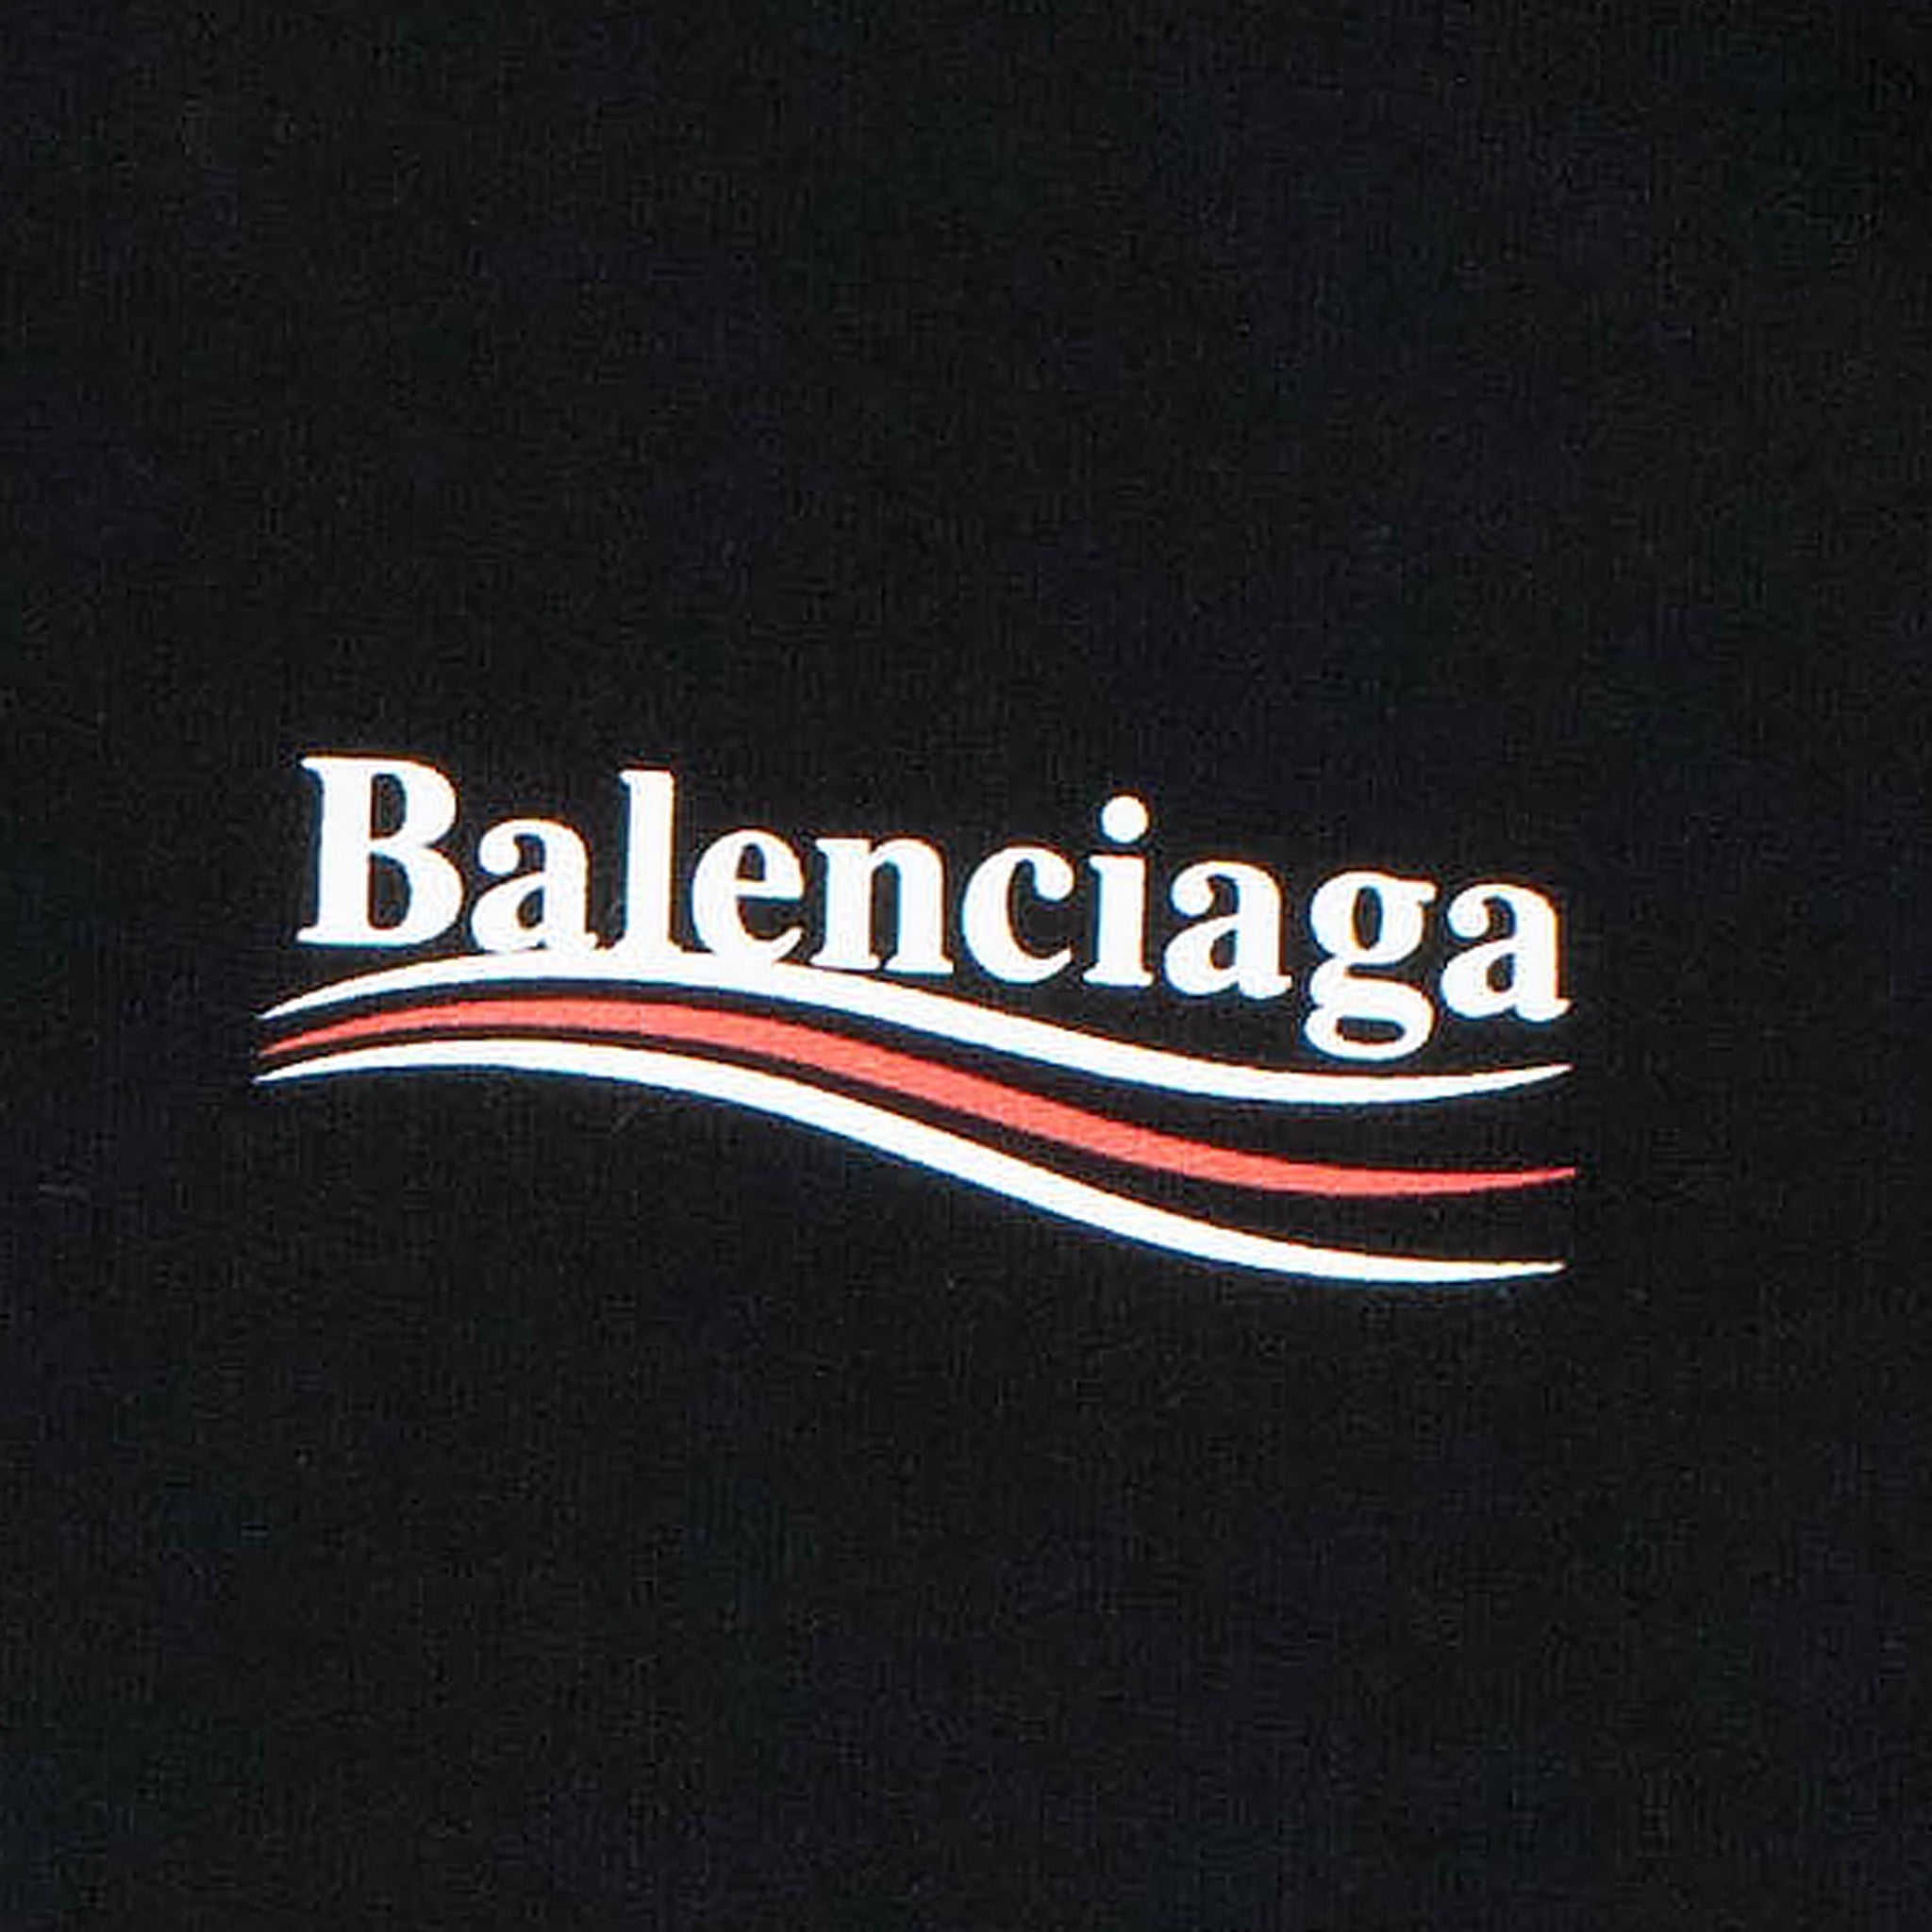 Why is the fashion world silent about Balenciagas campaign scandal